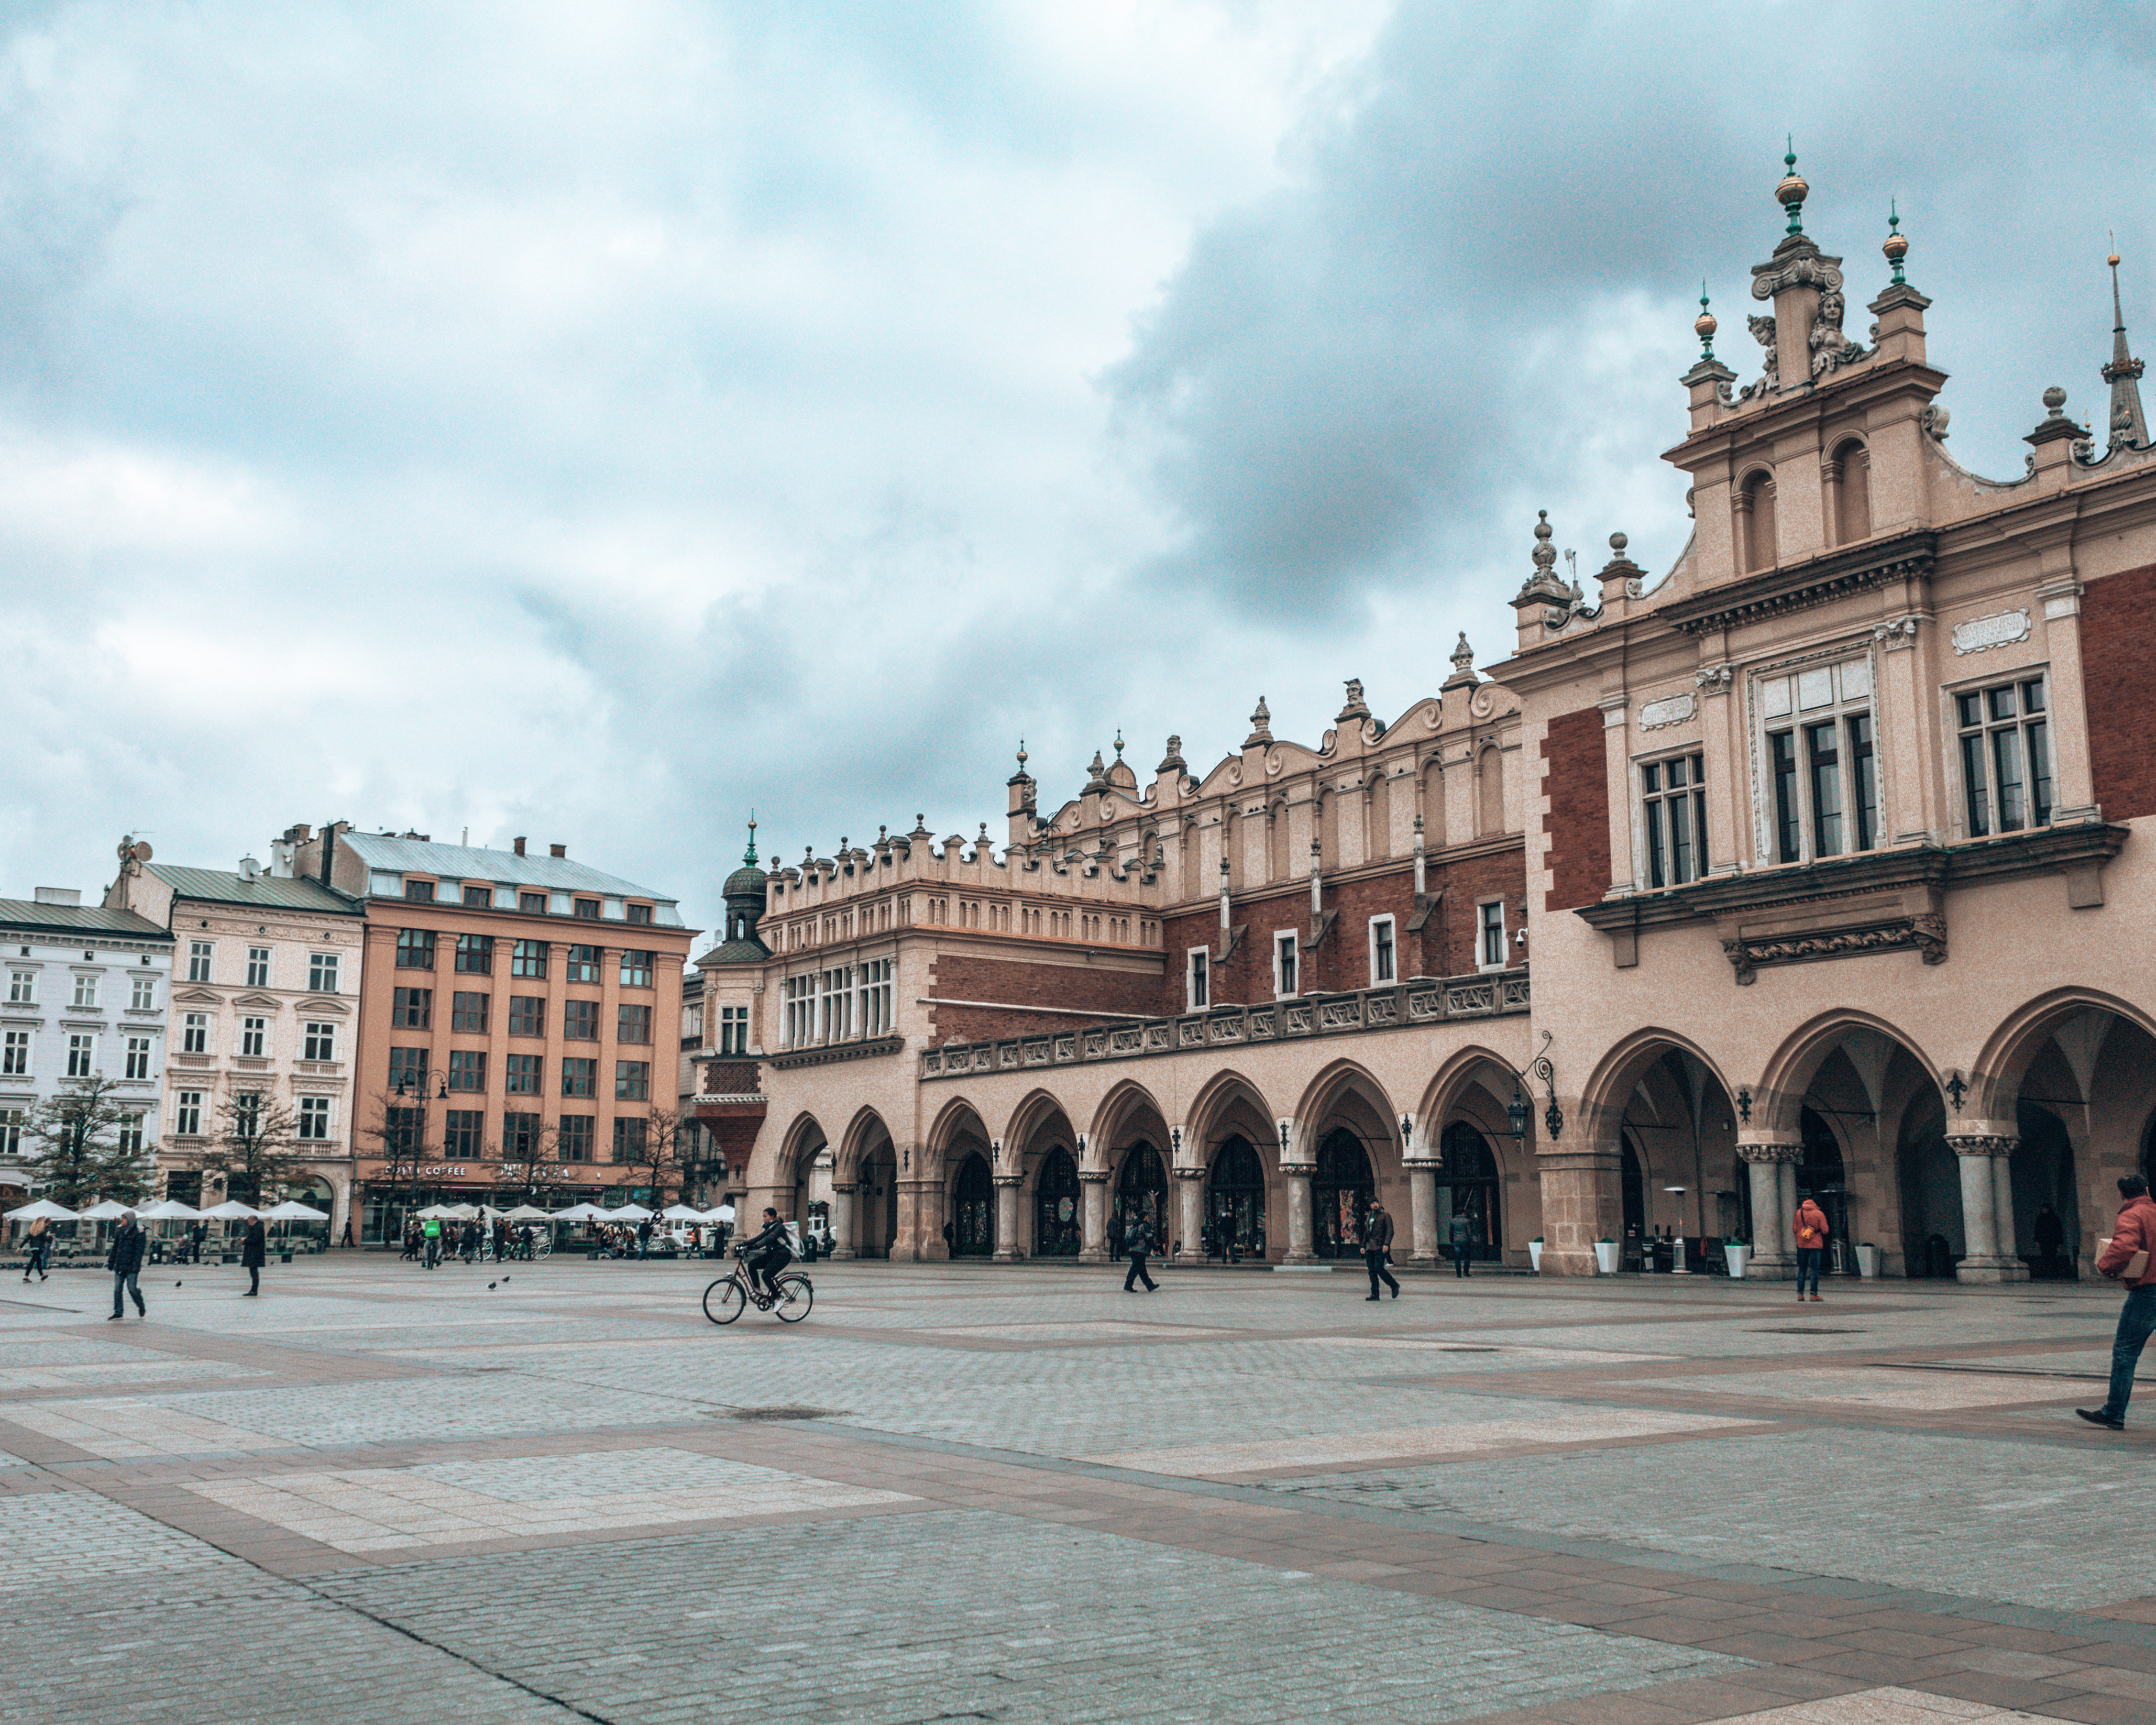 The market square in the old town of Krakow, Poland